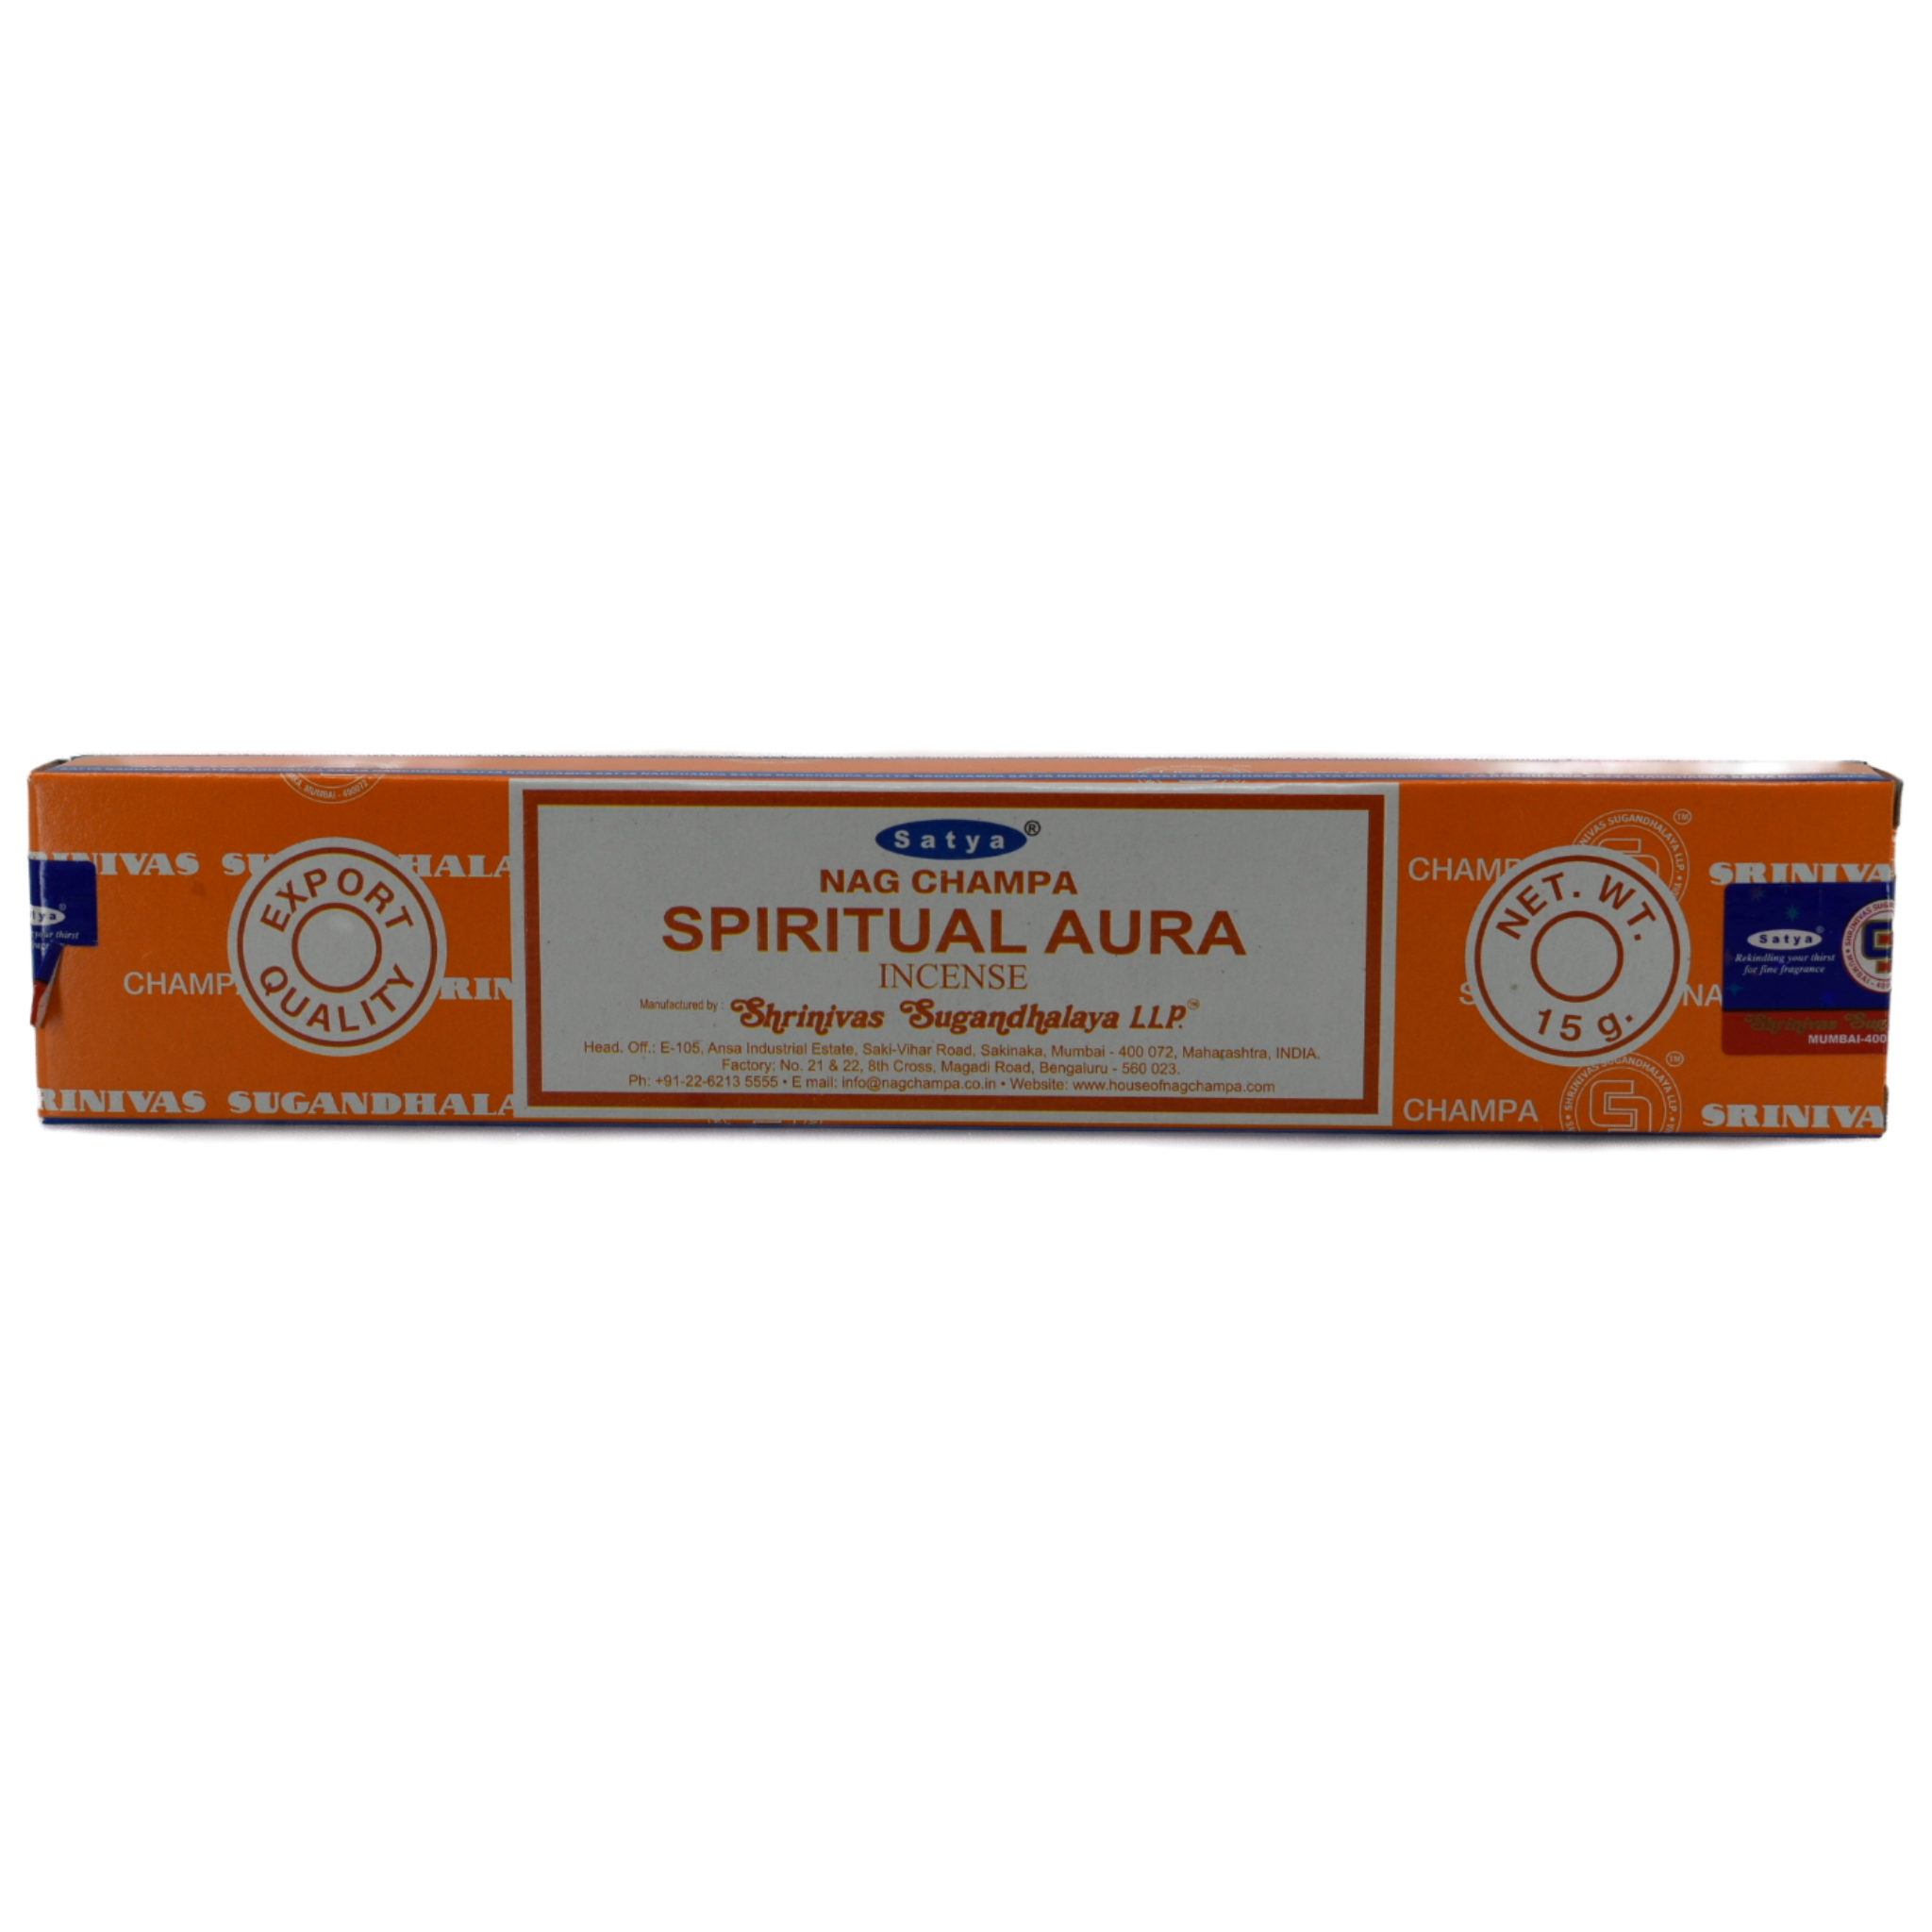 Spiritual Aura 15 gr Incense Sticks.  The cover is orange with lines through it.  The line design are company words.  The center has a white rectangle with a red border within the frame.  The top half of the rectangle lists the company name and title; Sayta Nag Champa Spiritual Aura Incense.  The bottom half lists the manufacturer's information.  There are two circles, one on each side of the rectangle.  The left one says Export Quality and the right circle says Net Weight 15 grams.  